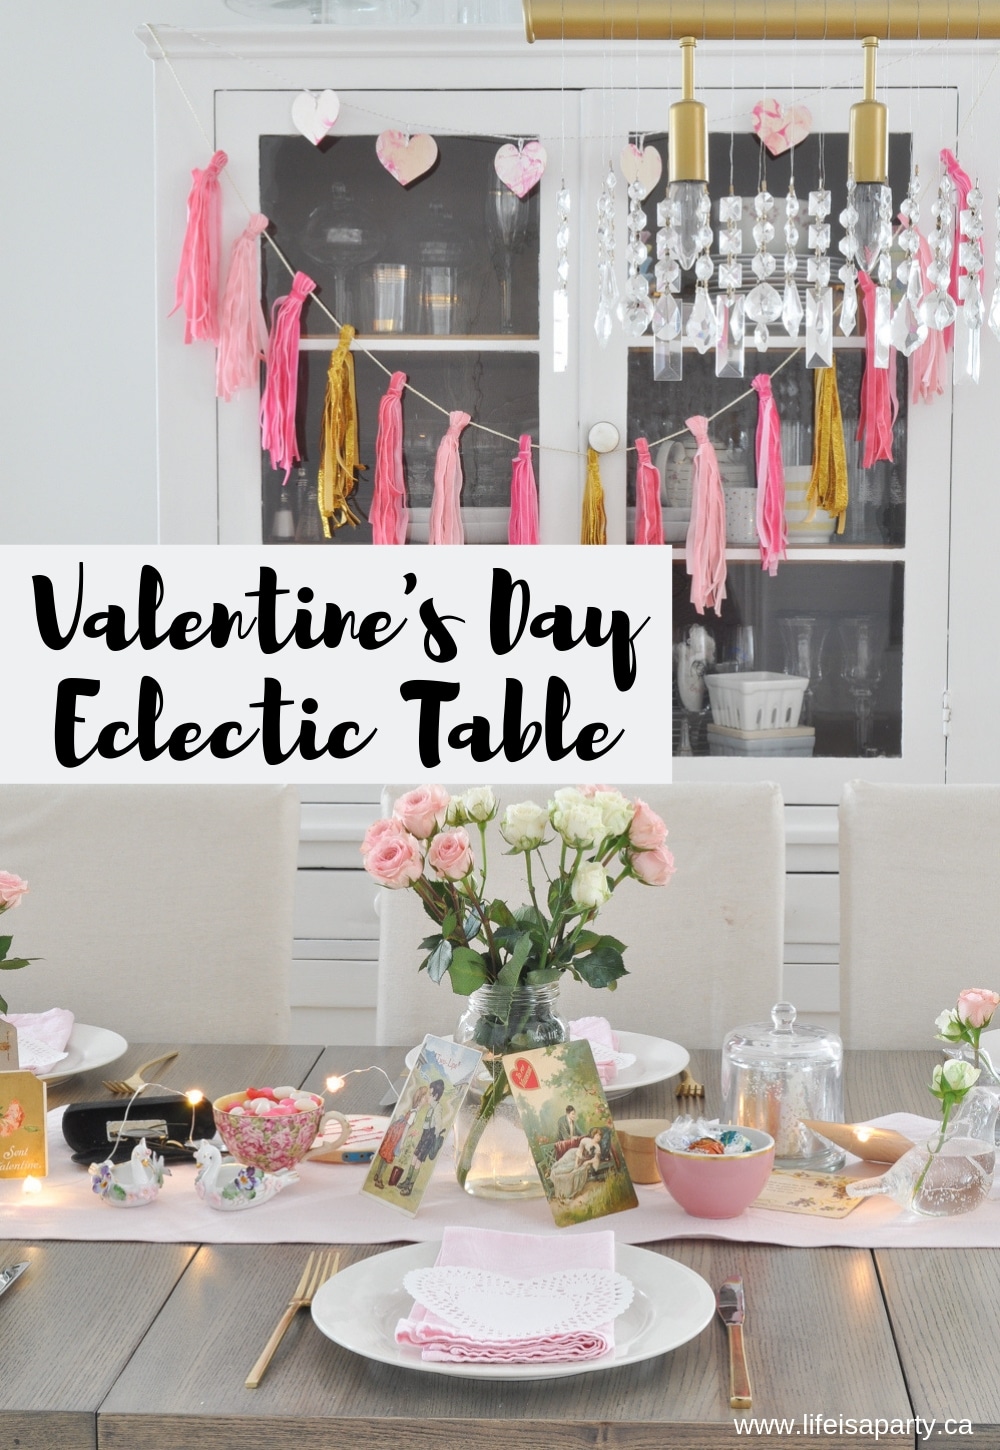 Valentine’s Day Eclectic Table